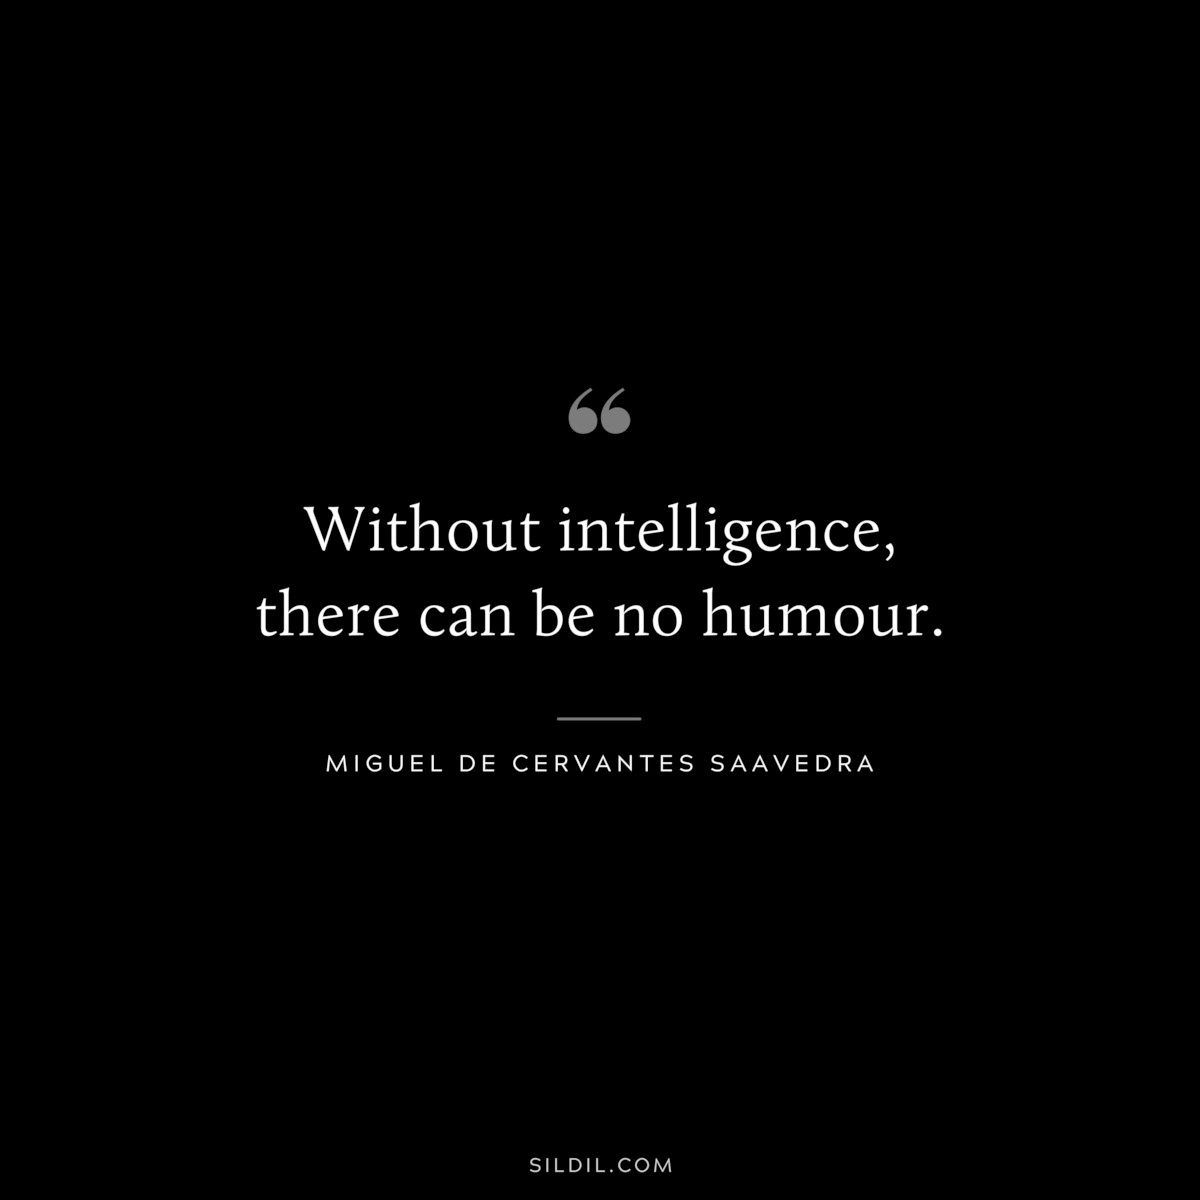 Without intelligence, there can be no humour. ― Miguel de Cervantes Saavedra